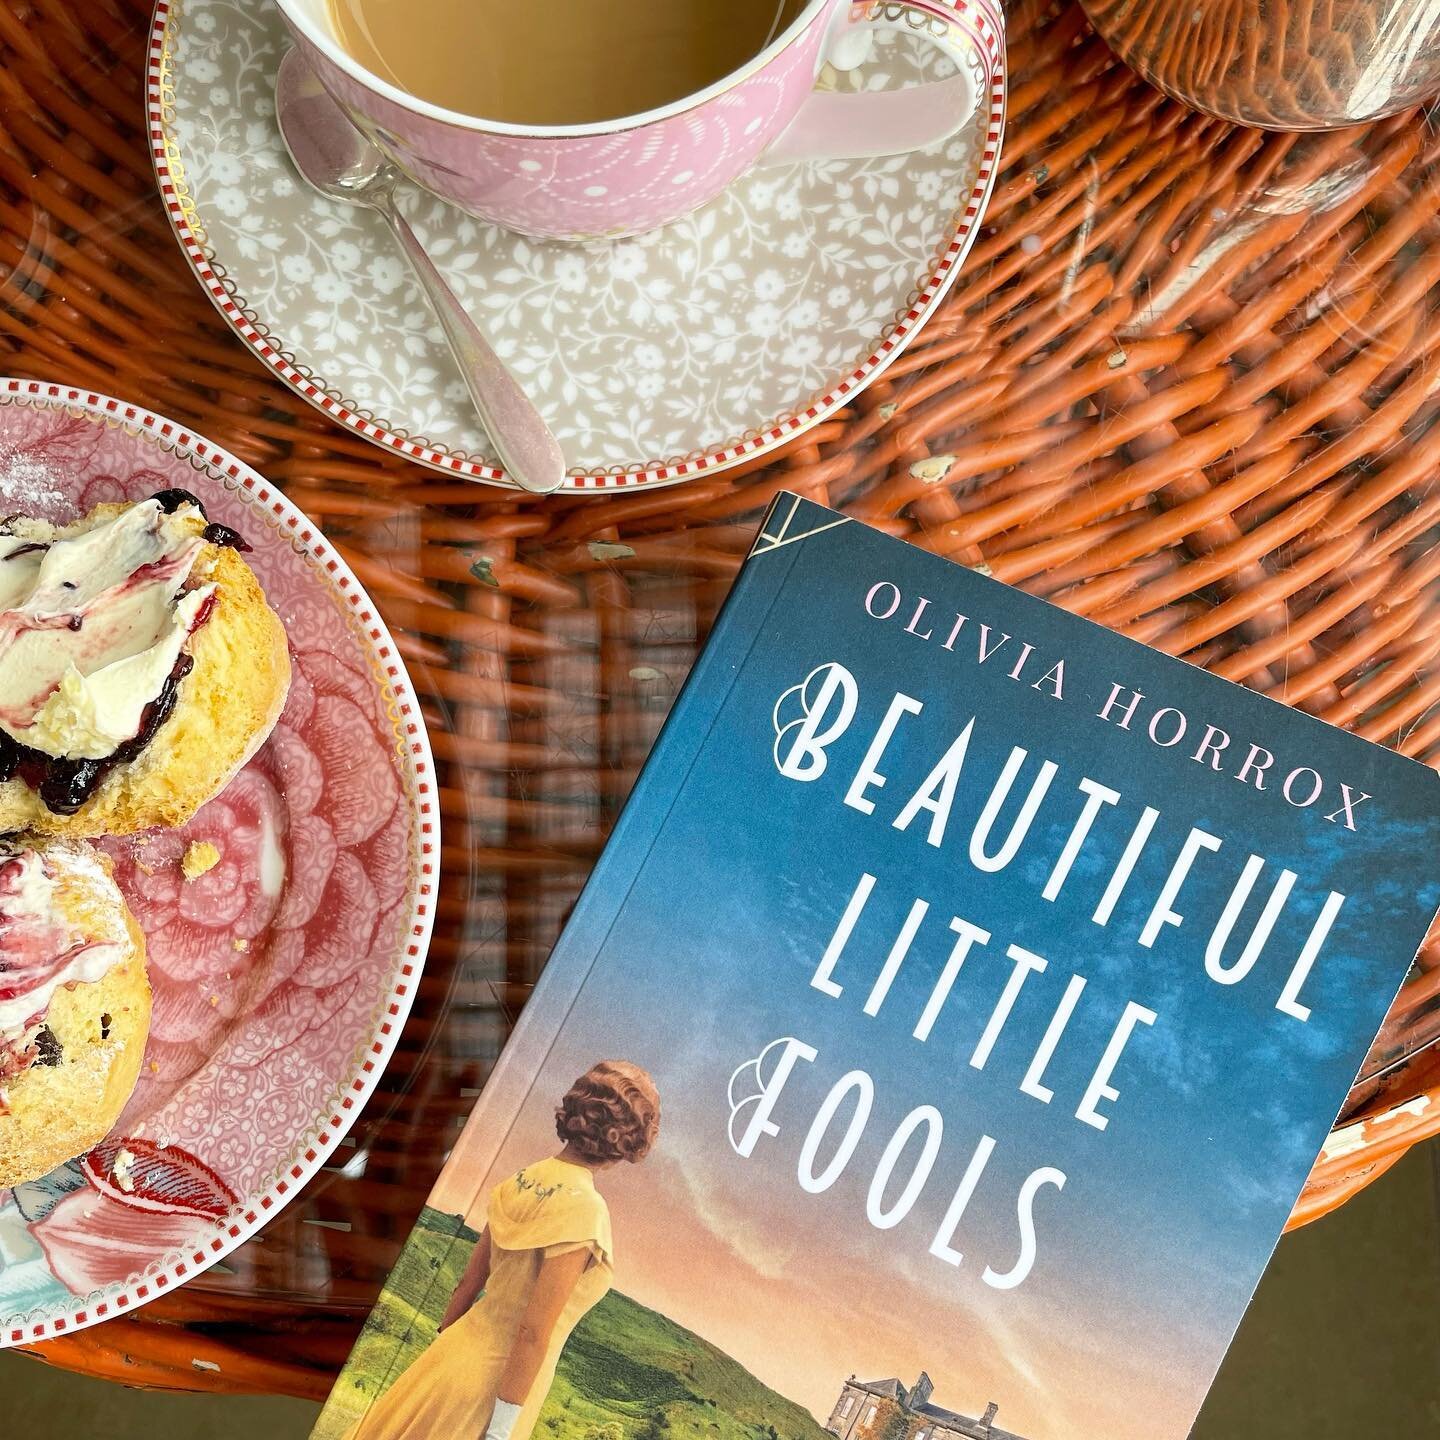 So proud of my friend and colleague @ohorrox whose debut novel comes out this month! 💗

Beautiful Little Fools is a gorgeous 1930s romance about finding yourself and falling in love set to the beautiful Cornish landscape. 

Birdie dreams of becoming